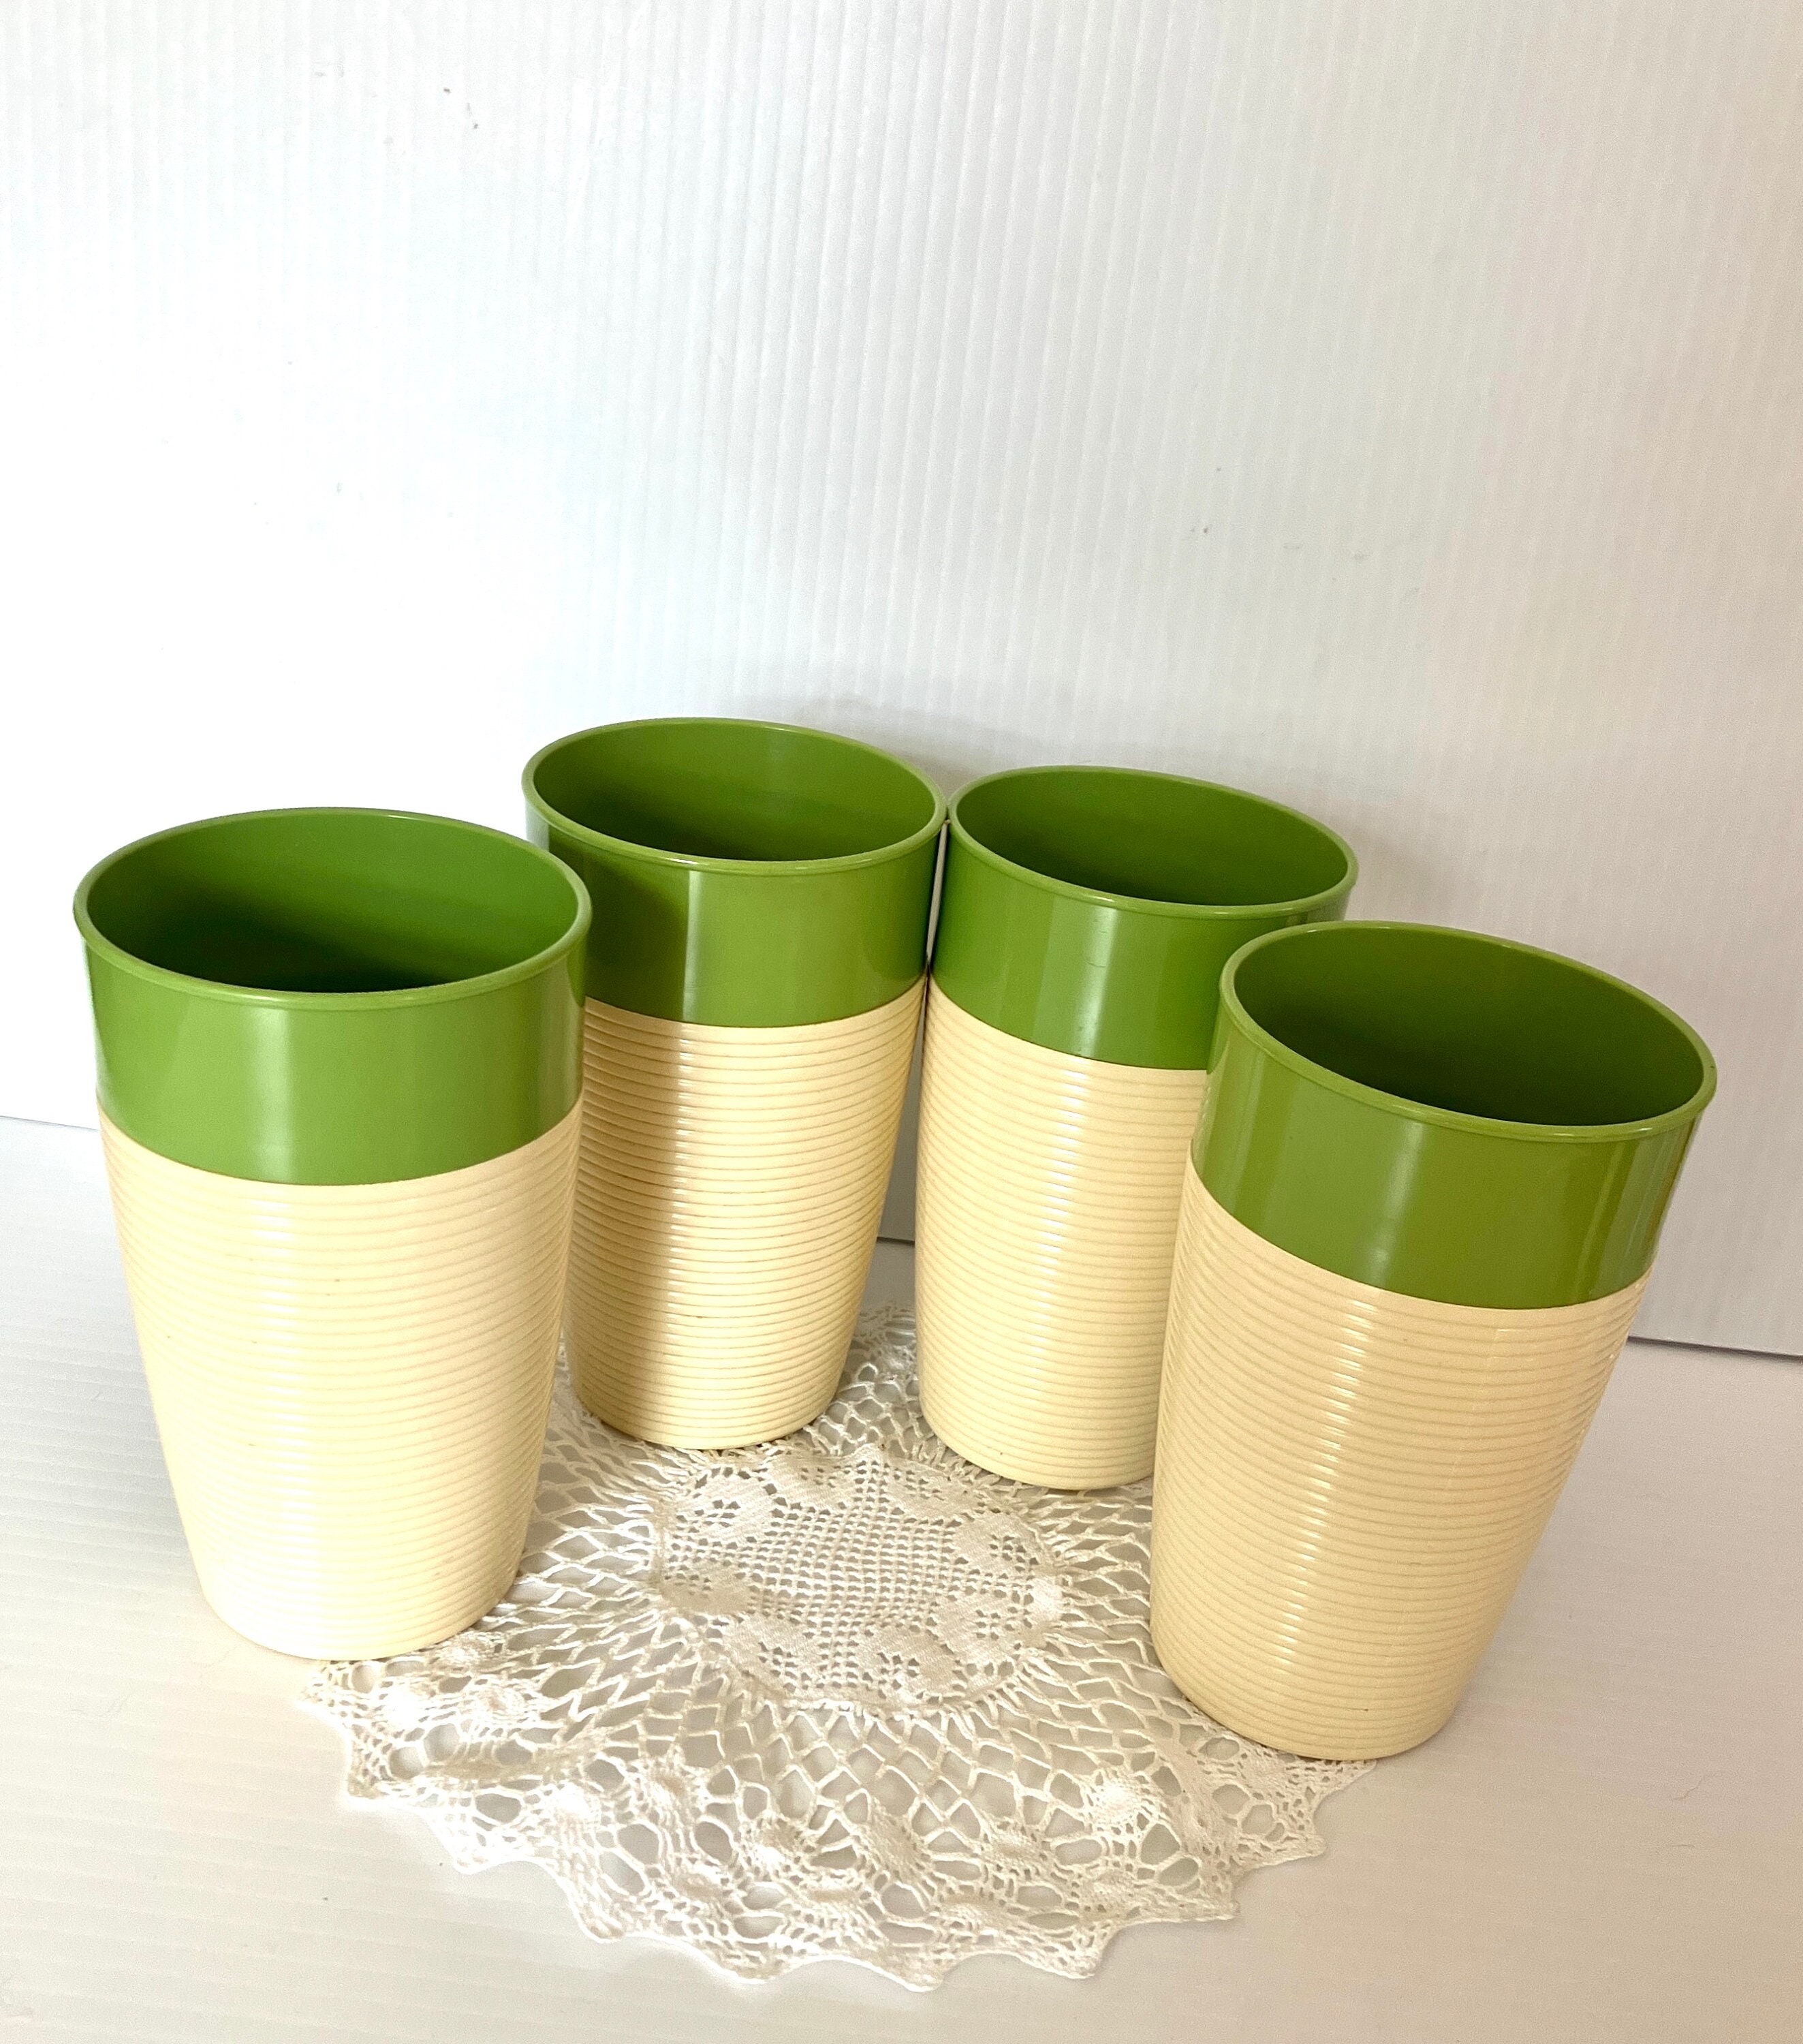 Set of 3 Vintage Thermo-serv Lipton Iced Tea 12 Oz. Tumblers Hot/cold Insulated  Cups 